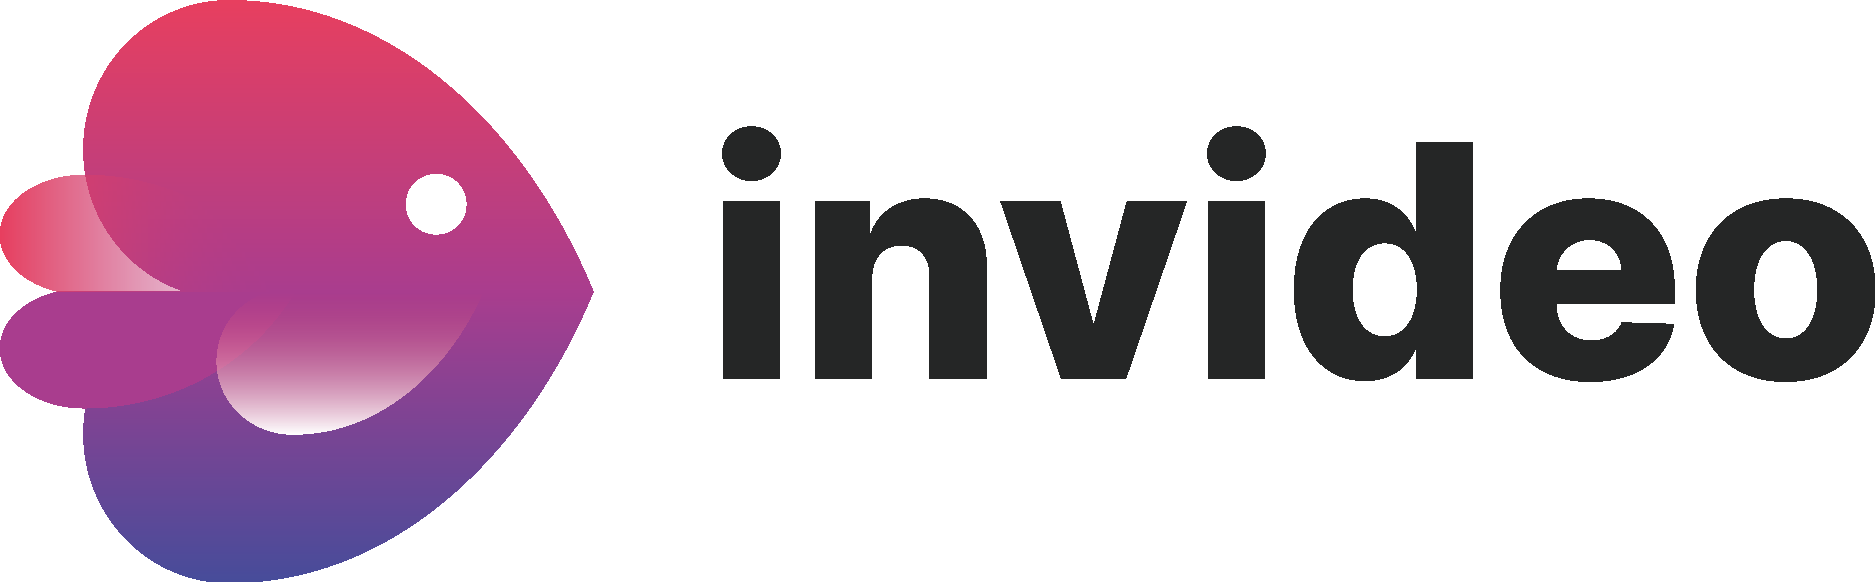 invideo free trial subscription plans